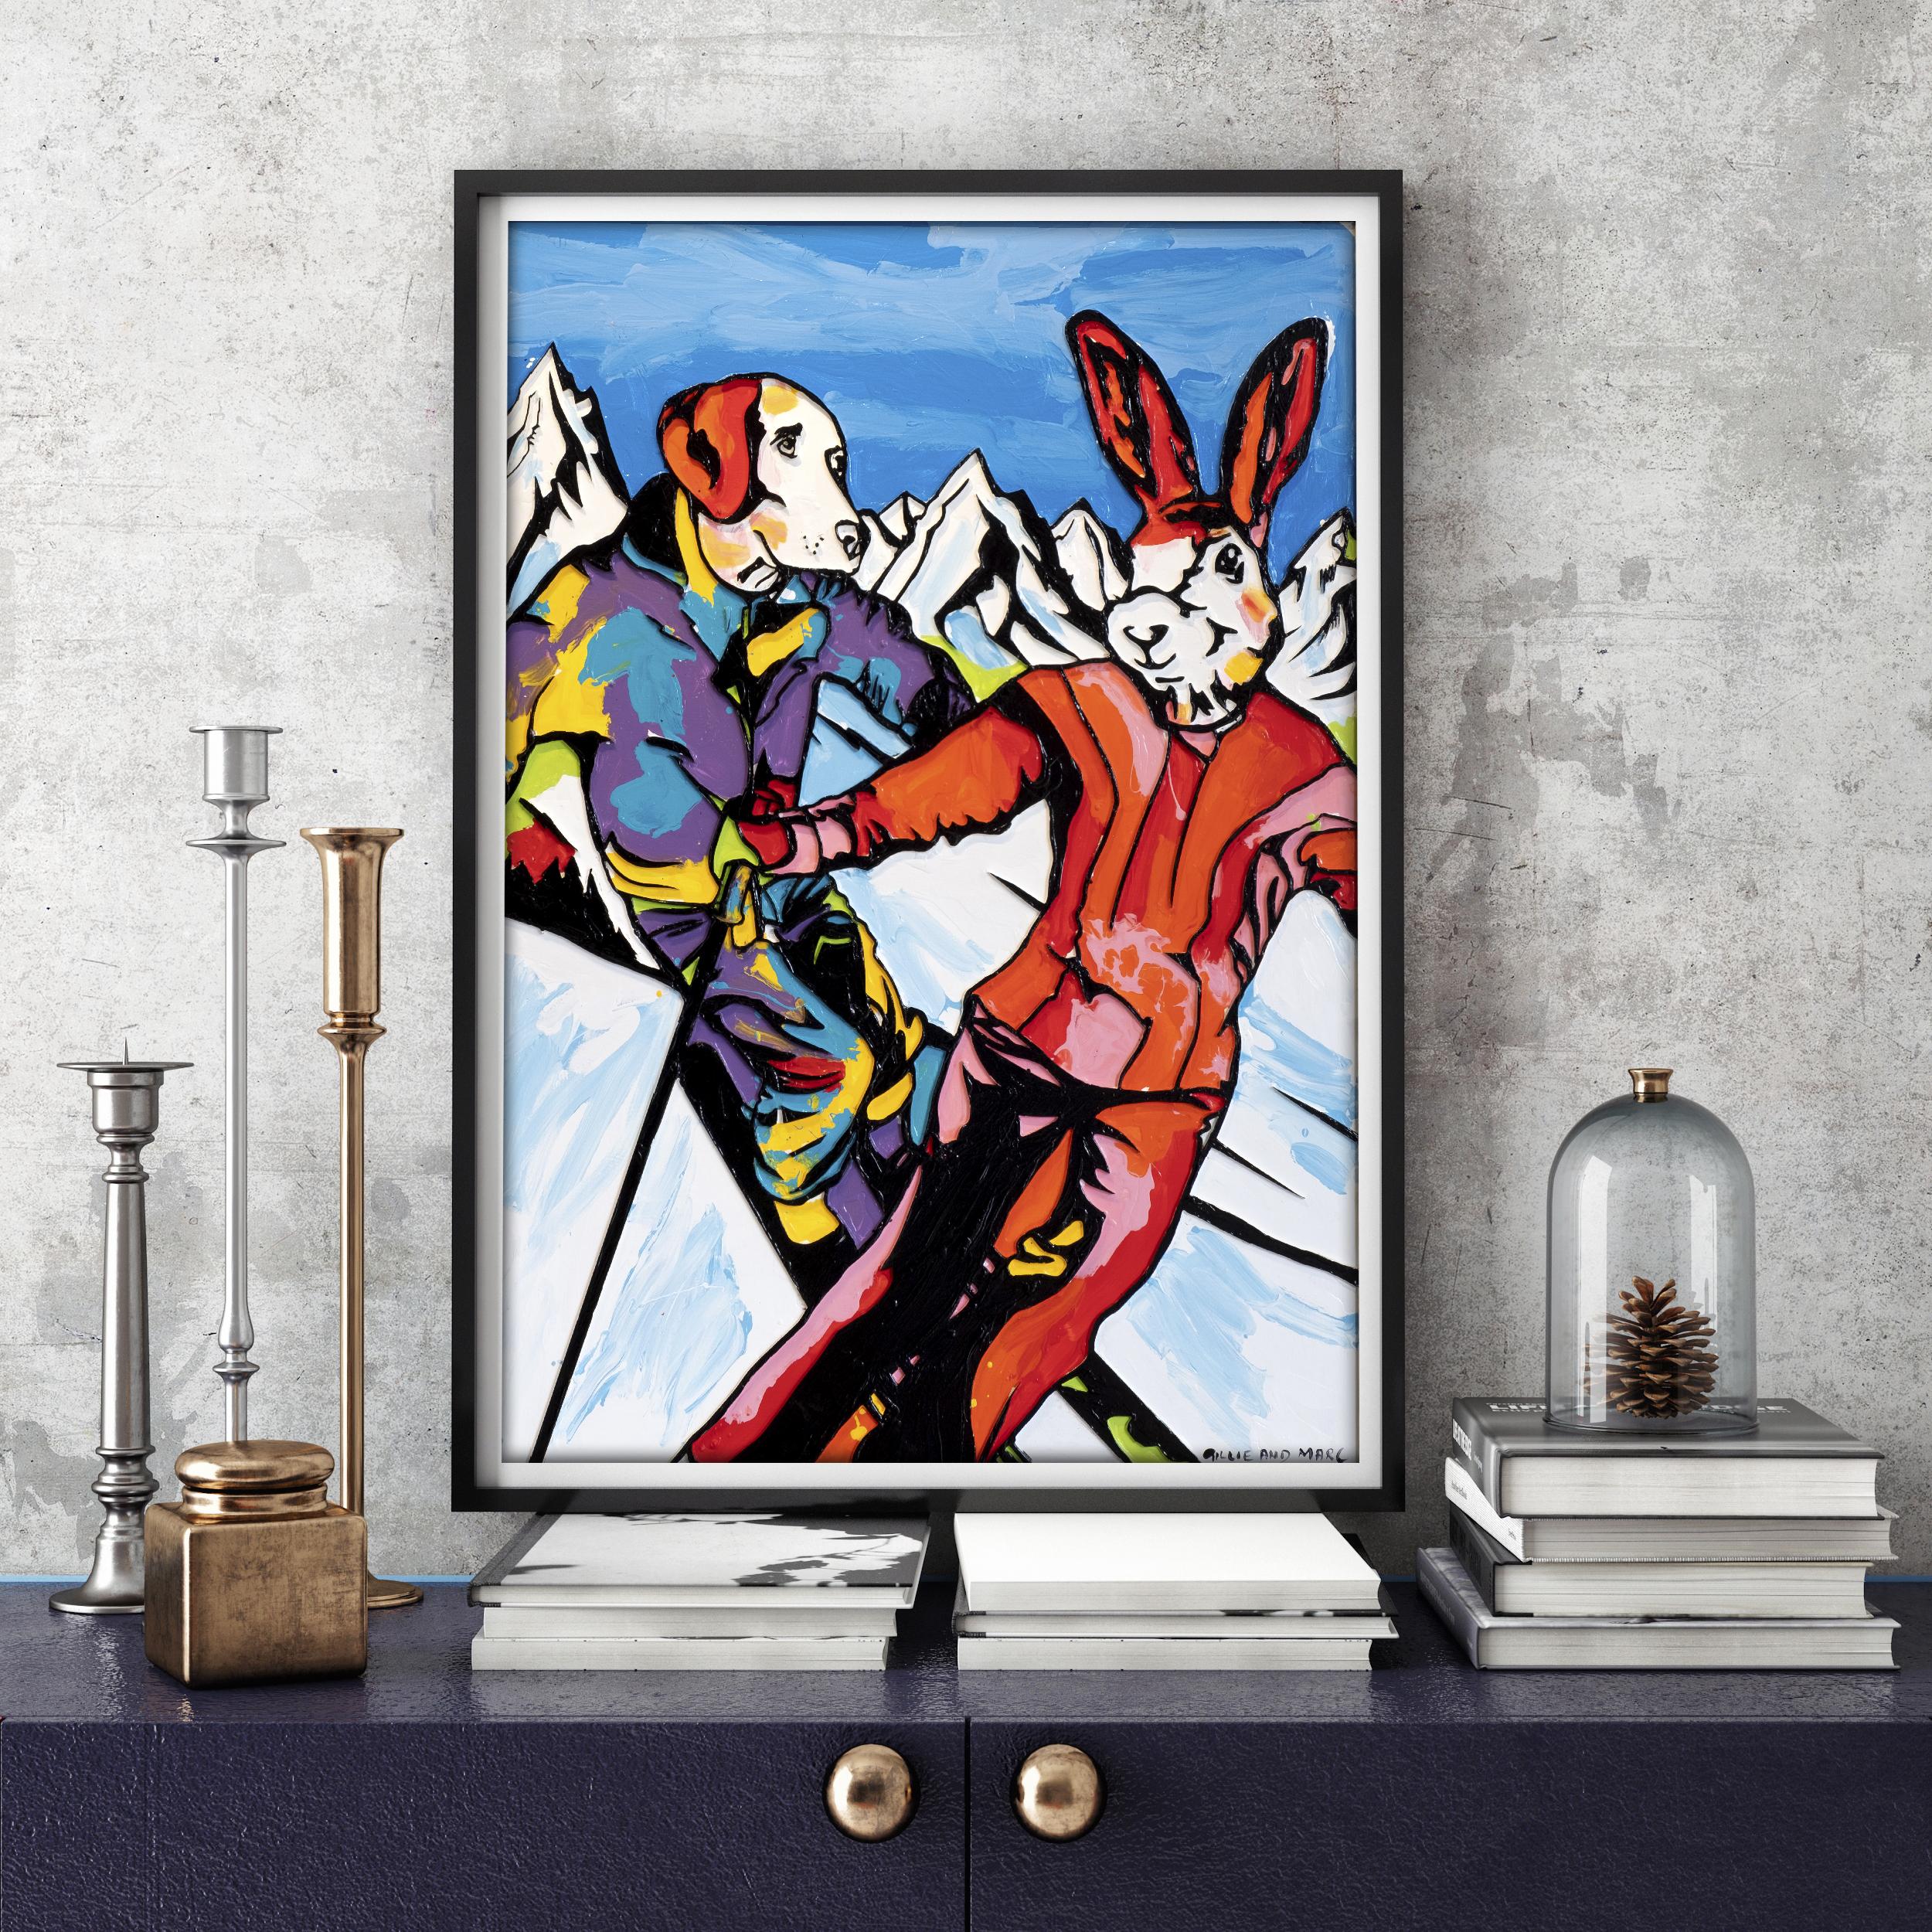 Pop Animal Print - Gillie and Marc - Limited Edition - Skiing - Together - Gray Figurative Painting by Gillie and Marc Schattner